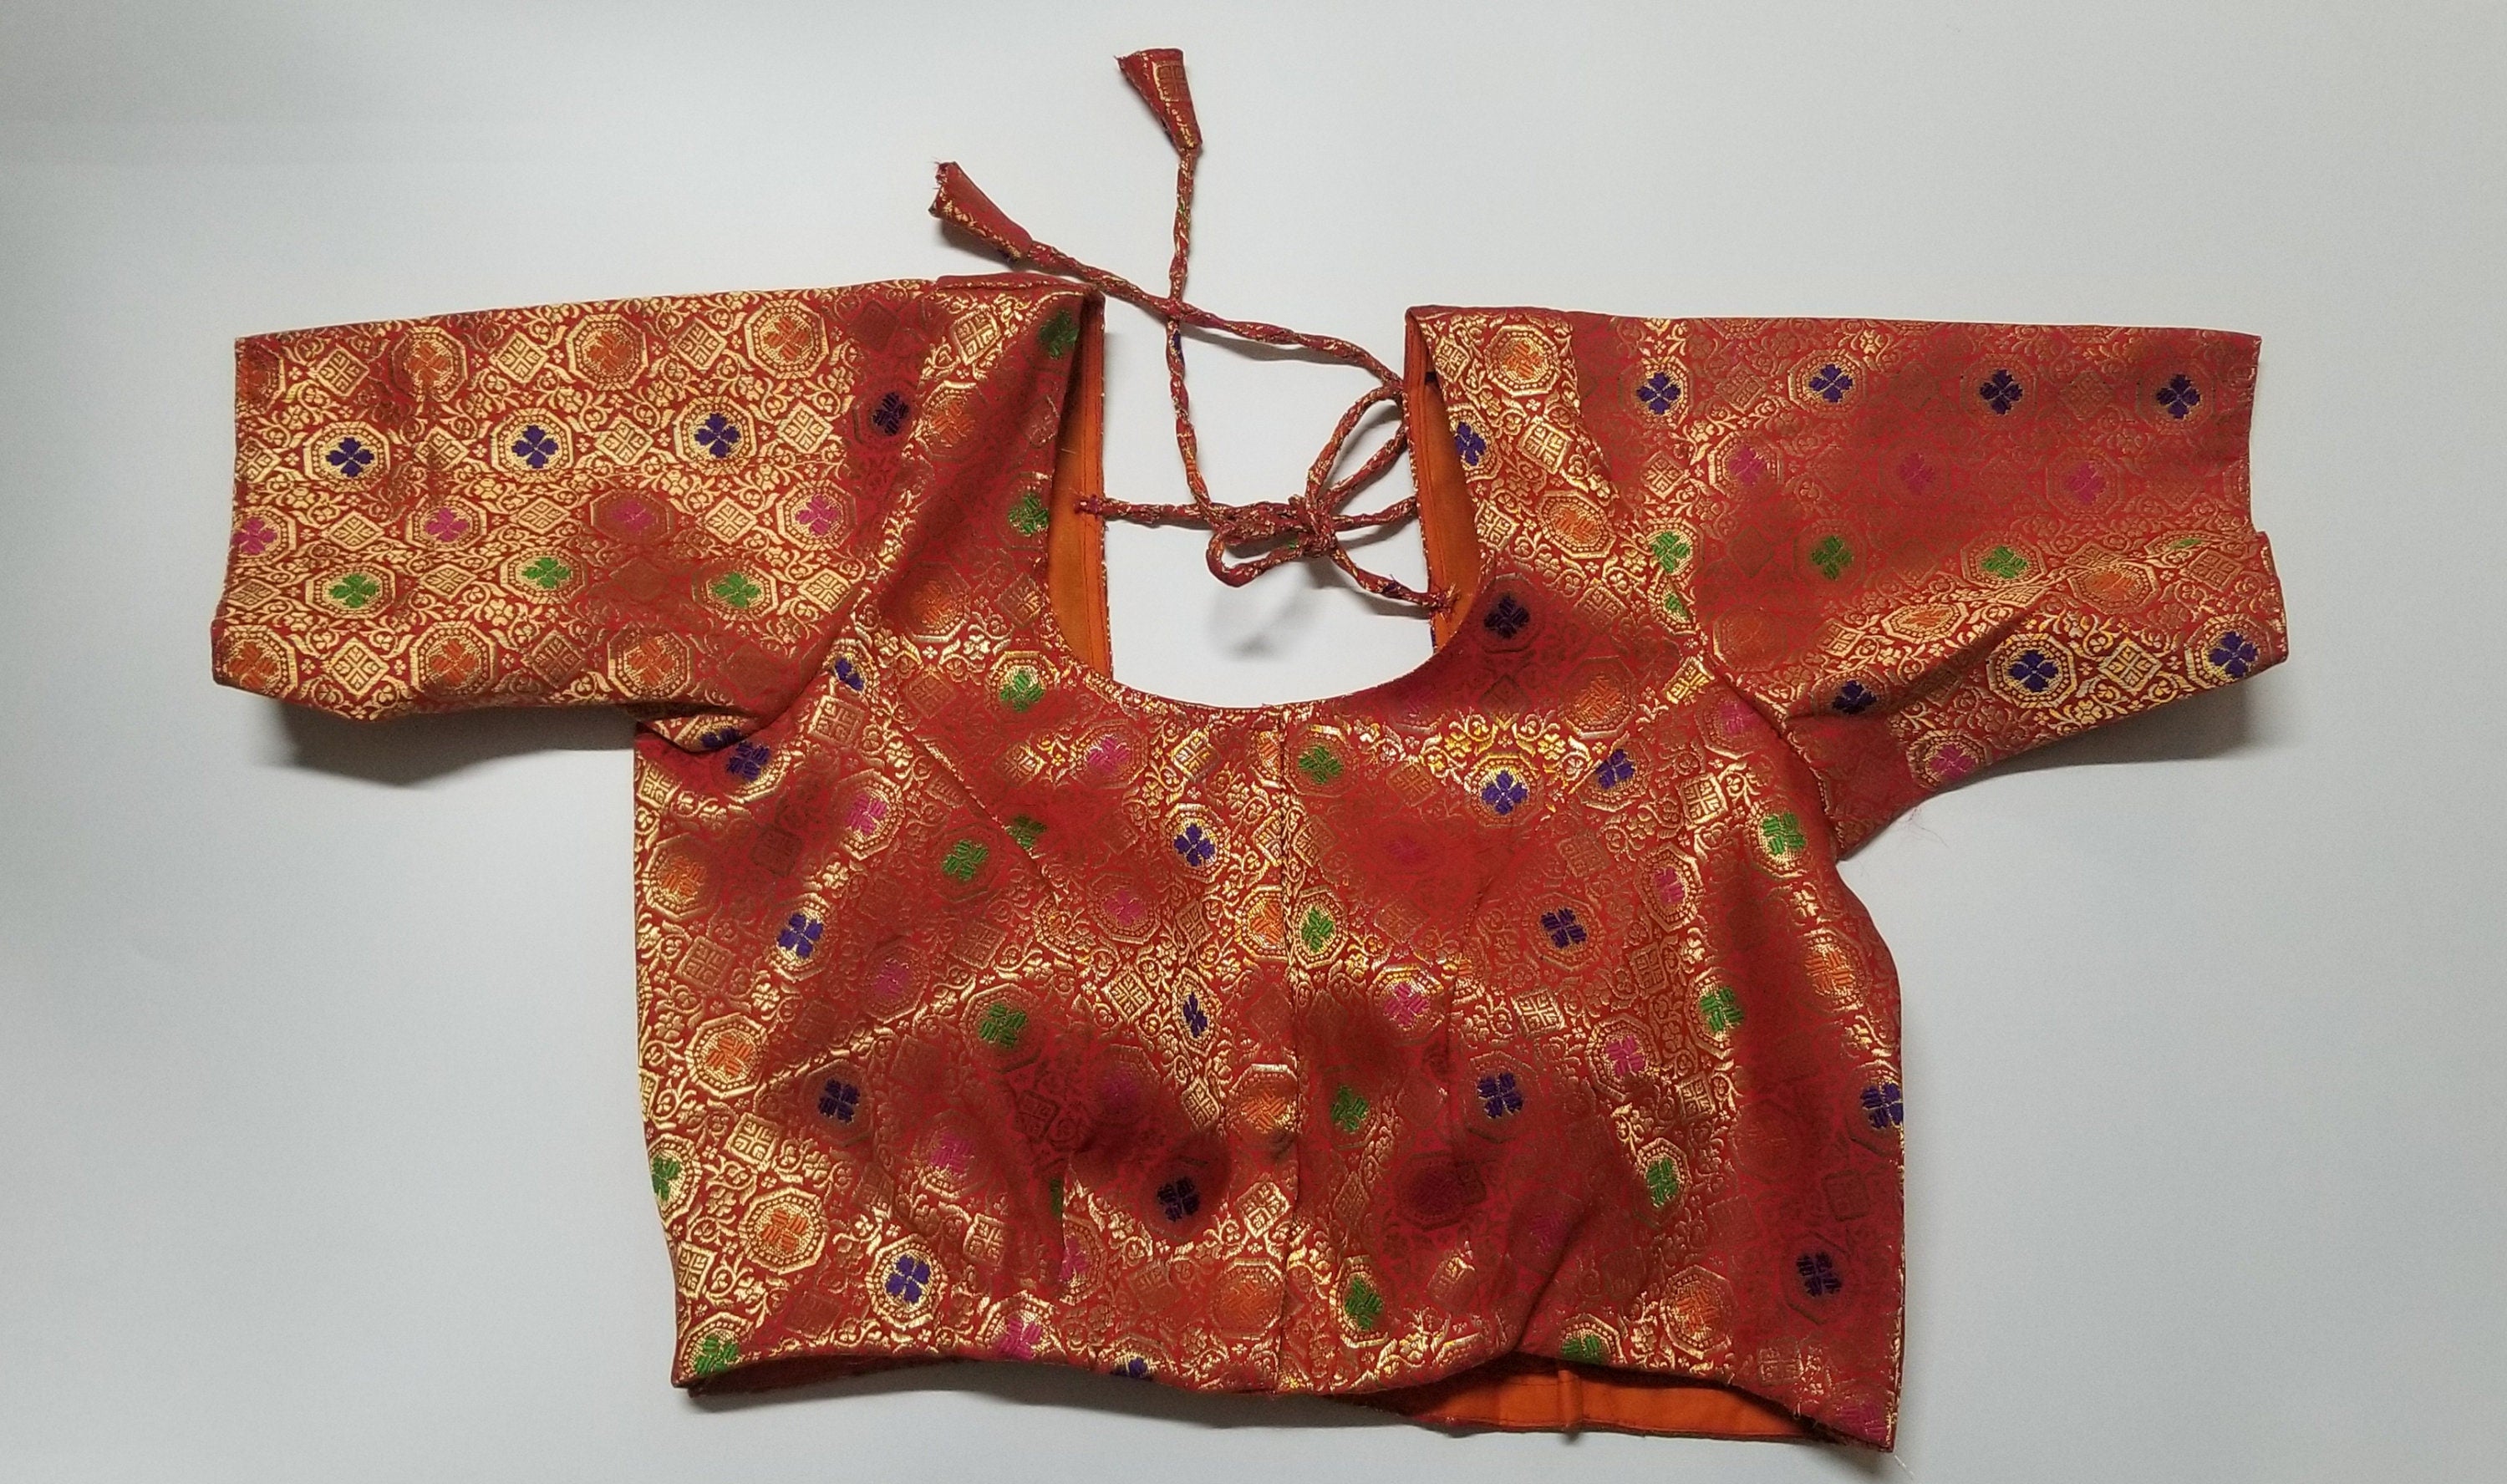 Readymade Saree Blouse - Red Silk with gold and multi-color Blouse - Princess cut padded - size 38" (alter 36", 40", 42")